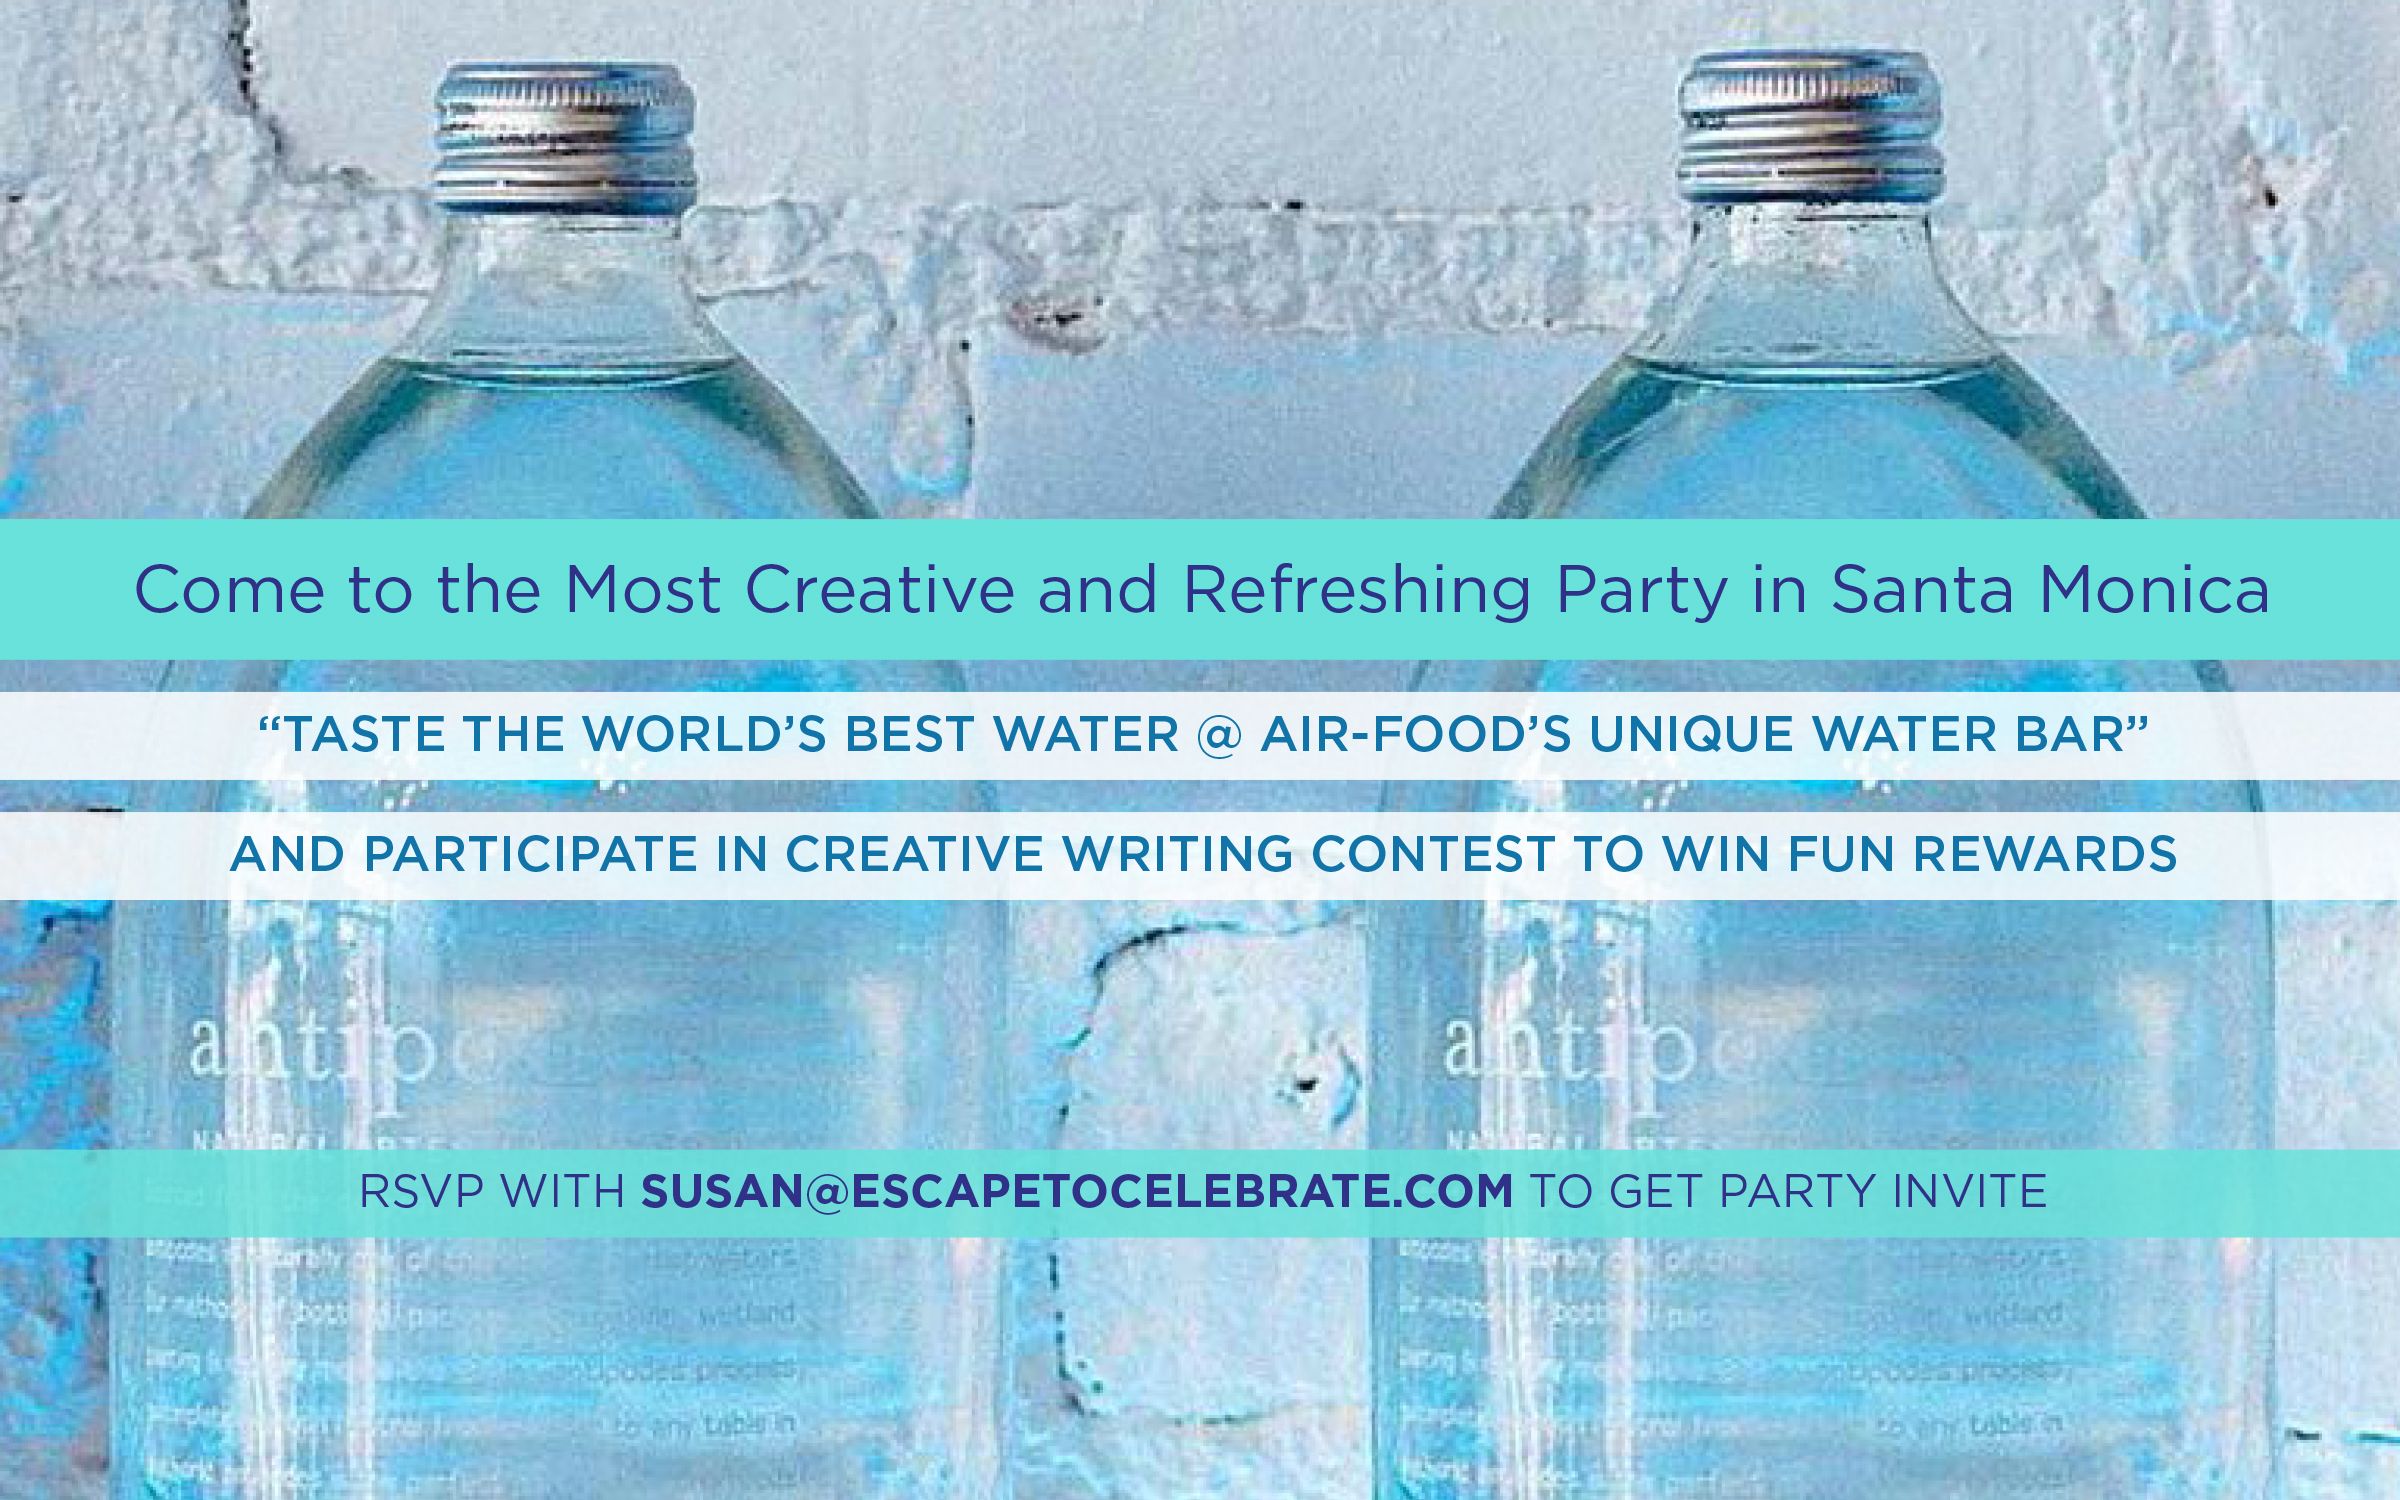 The Most Creative & Refreshing Party